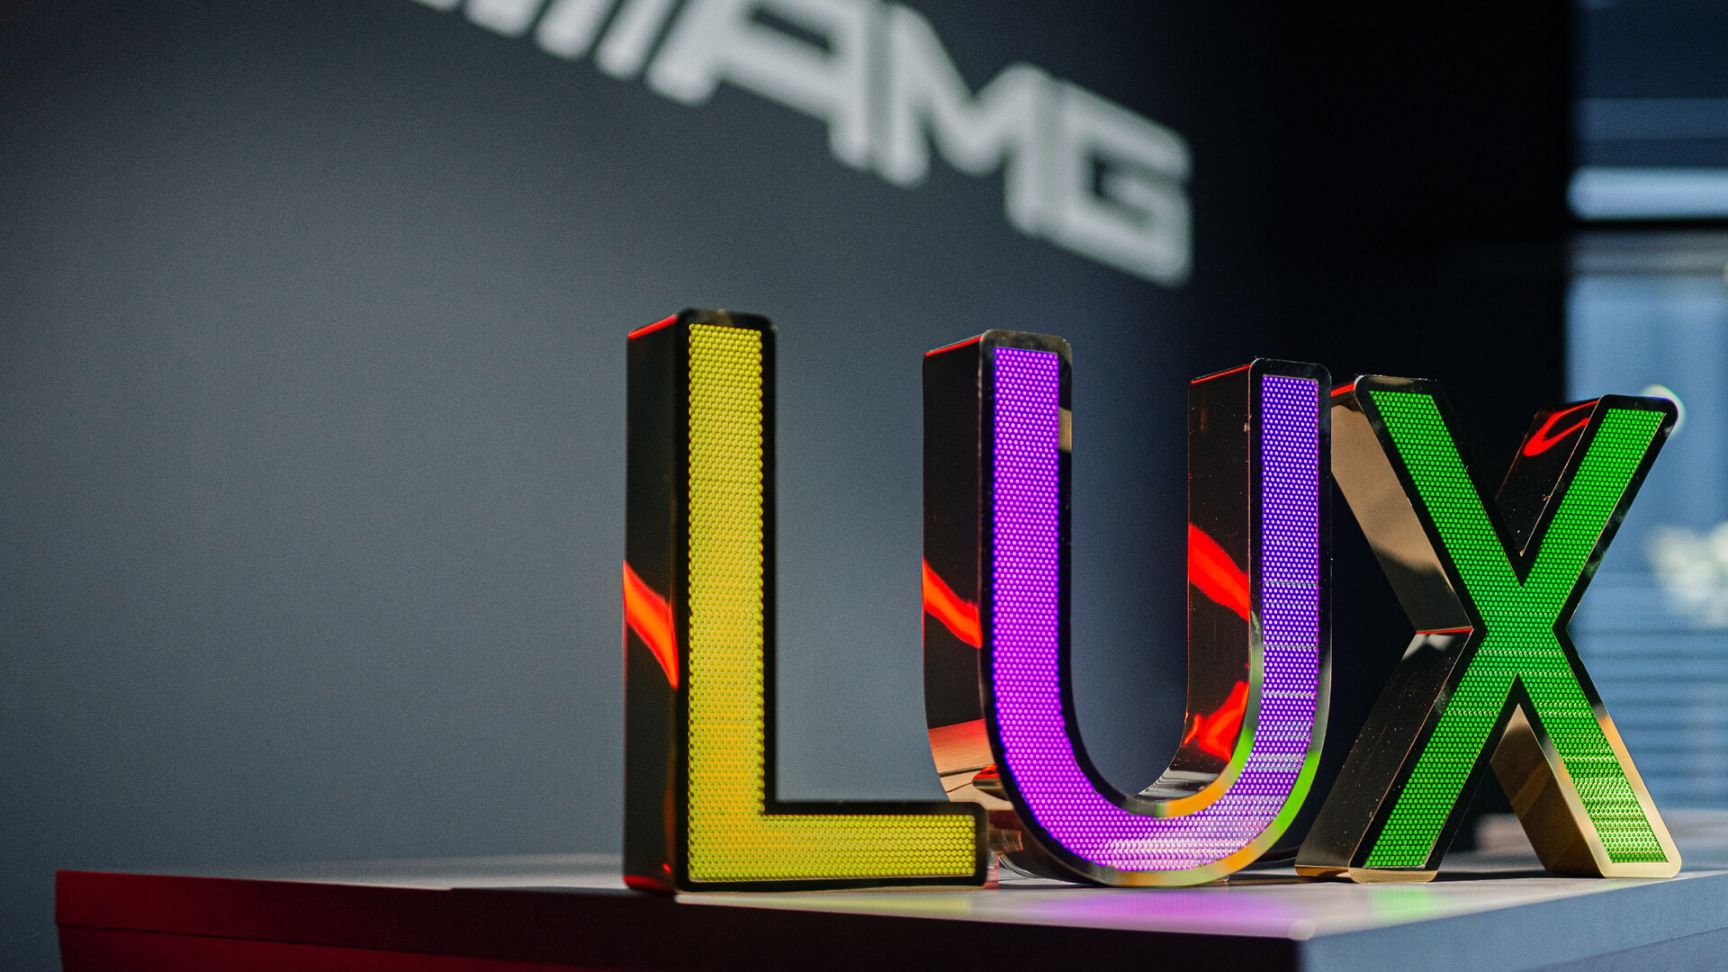 LUX perforated stainless steel letters - LUX inscription made of perforated stainless steel sheet, illuminated with LED in three colors in Mercedes showroom